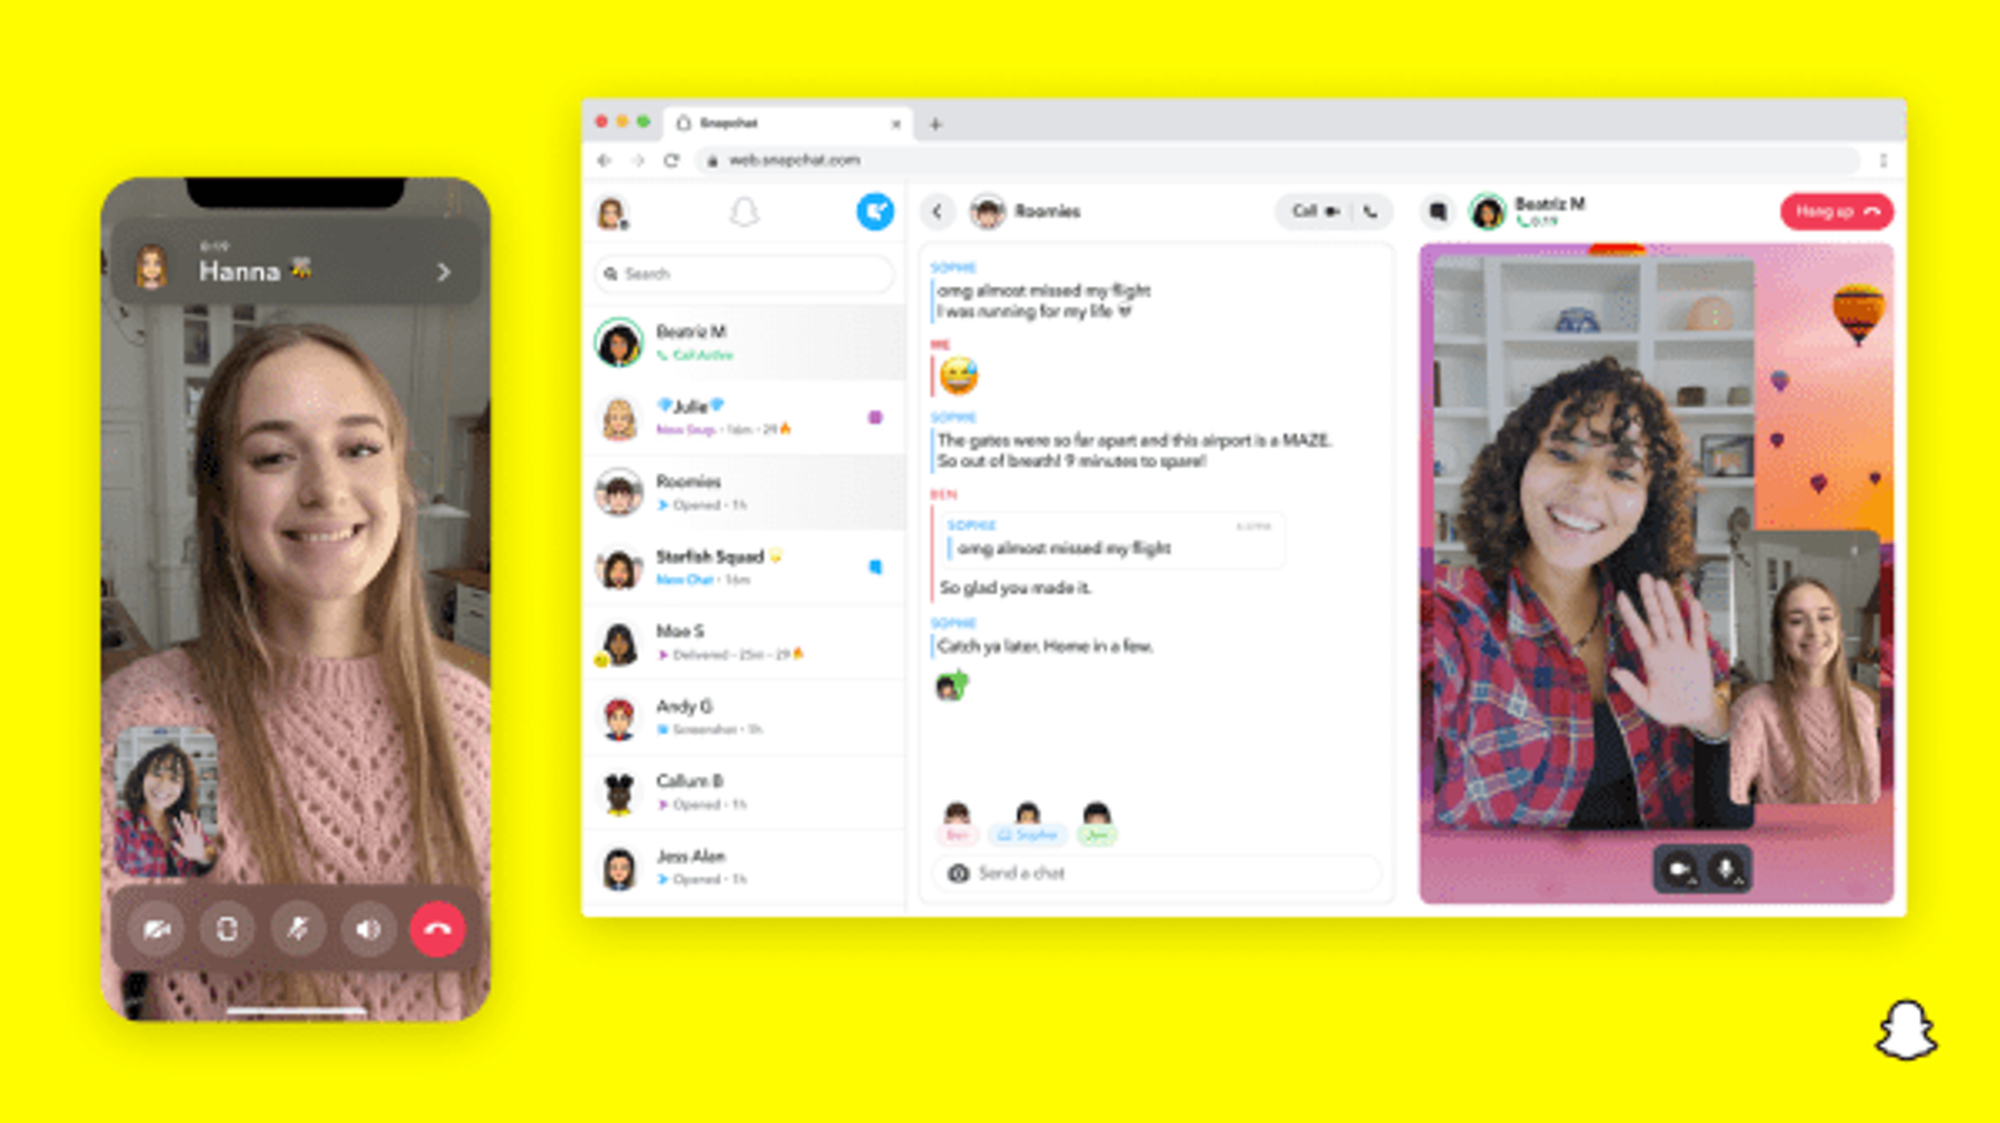 Snap launches Snapchat for Web to bring the app's core features to desktop